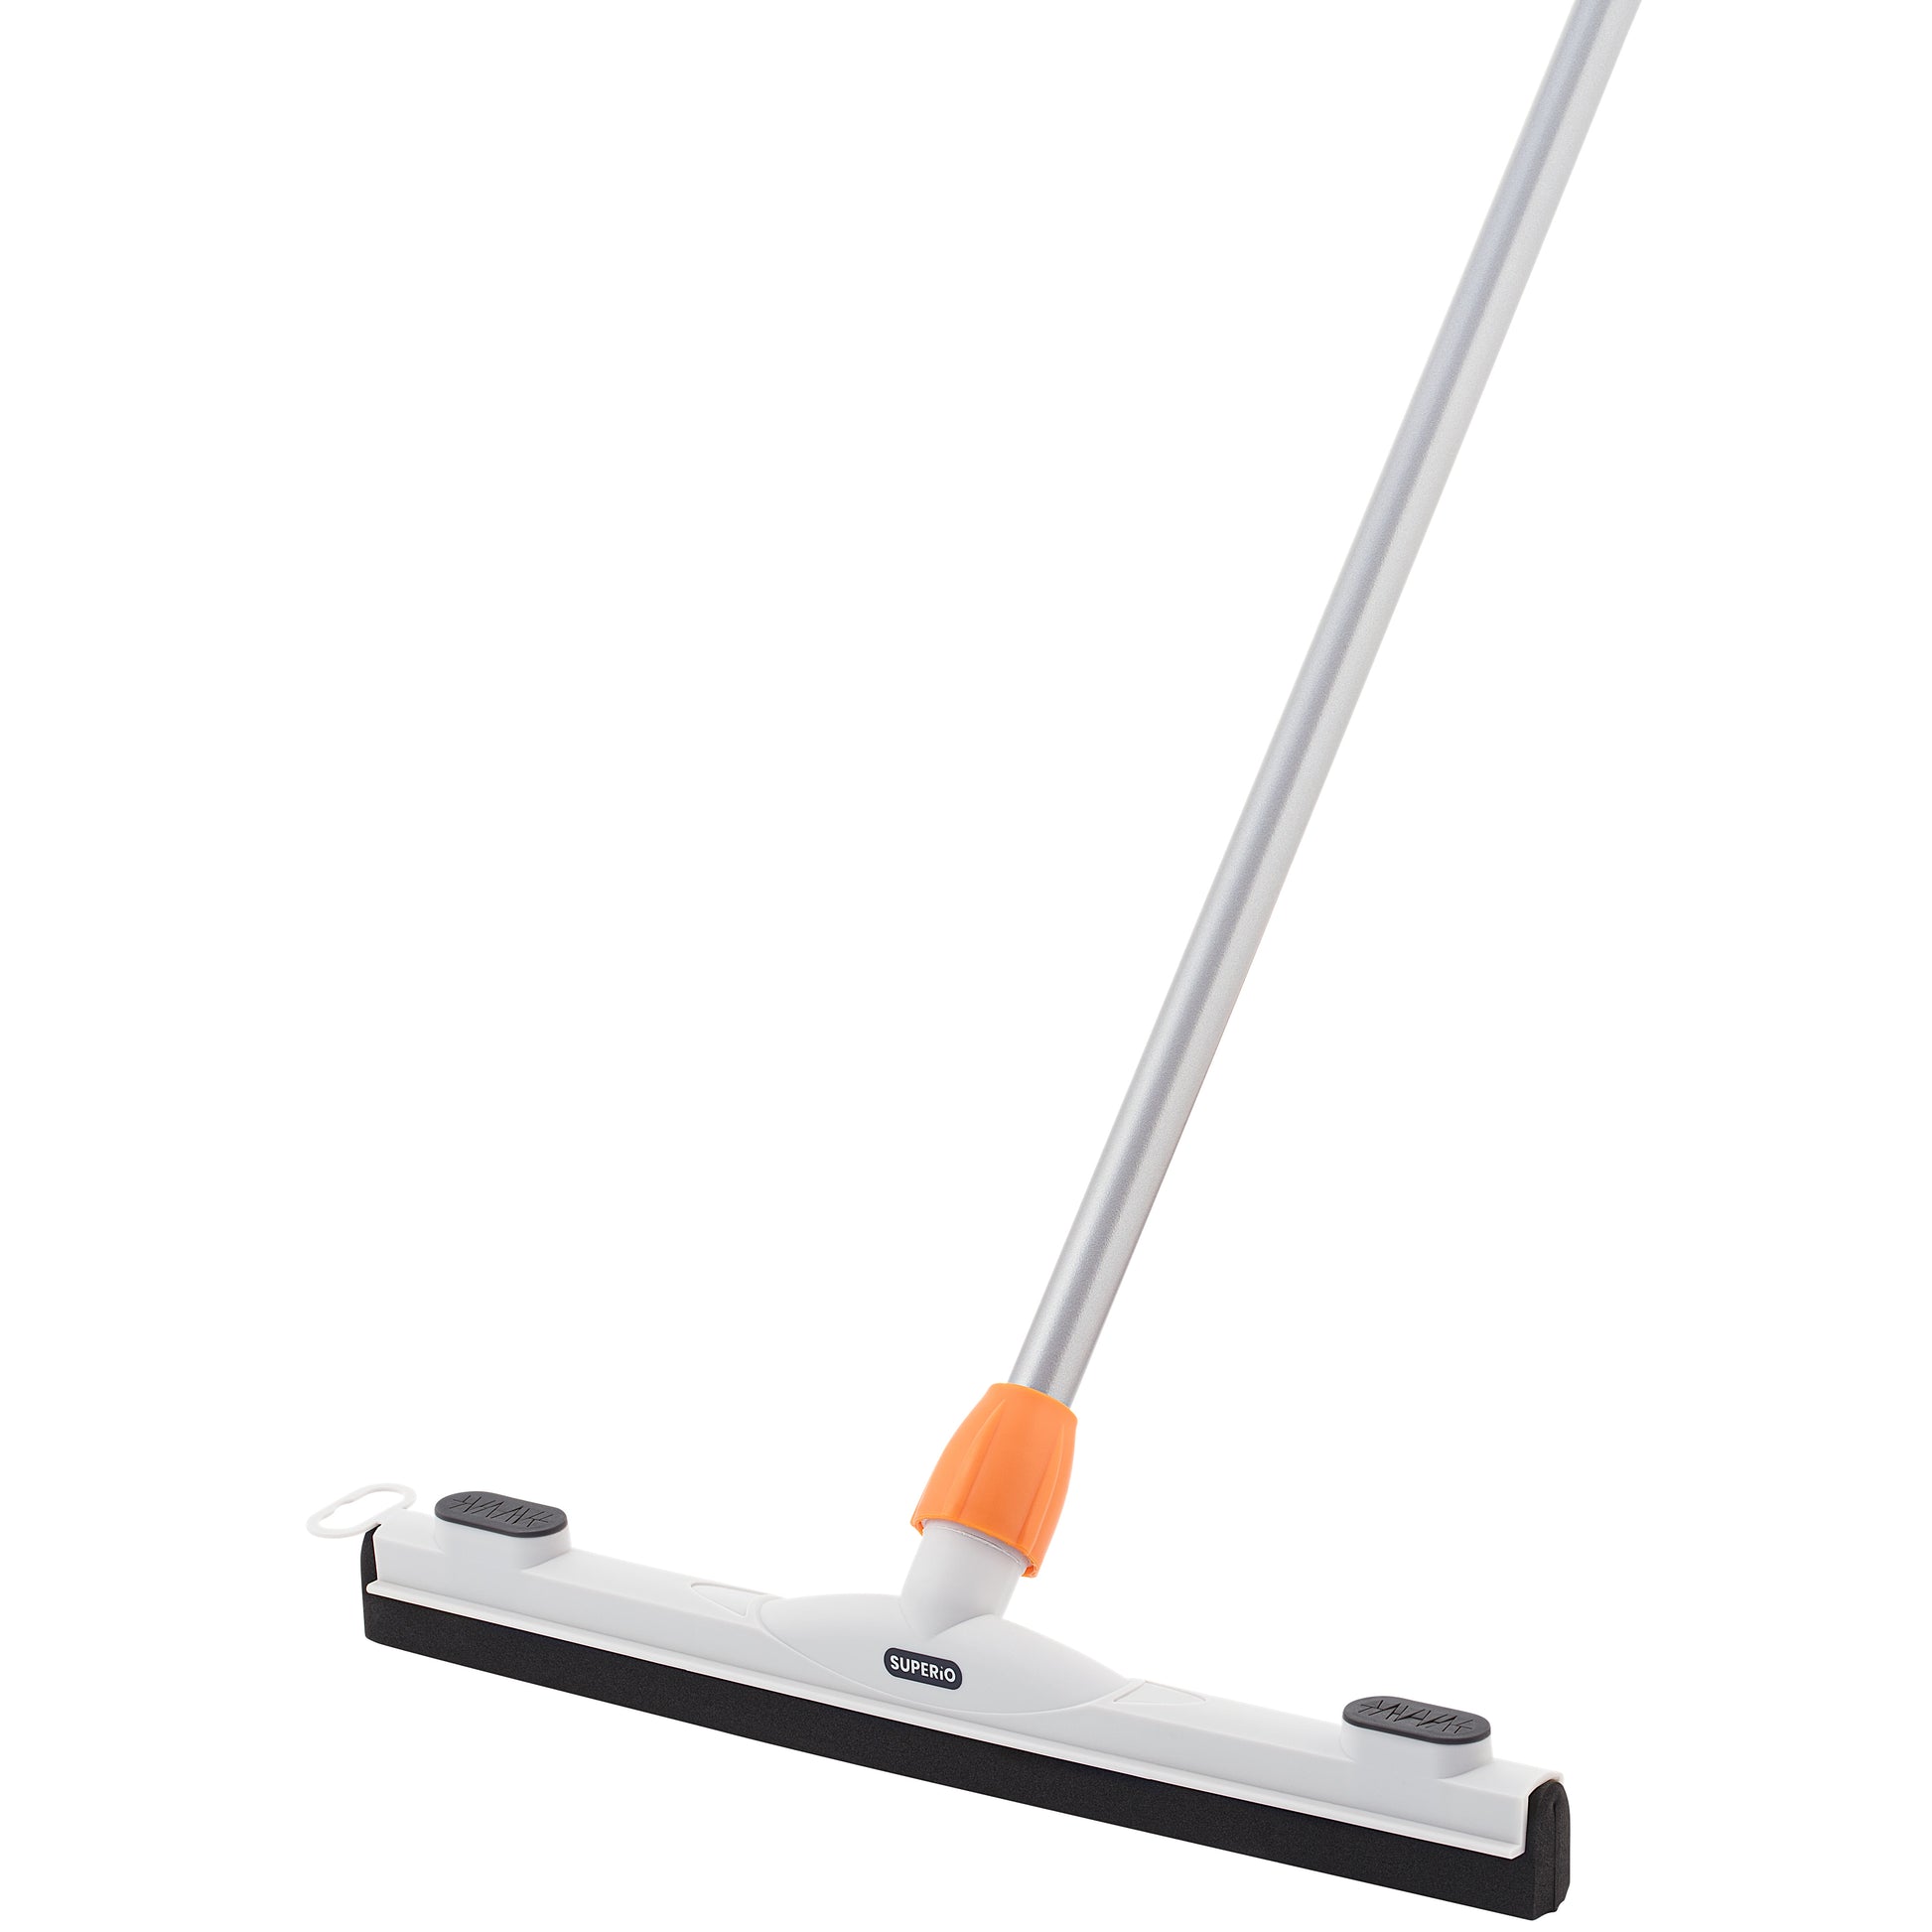 Superio 18 Foam Floor Squeegee, with 48 Metal Handle, Wipe and Dry Washing Floors